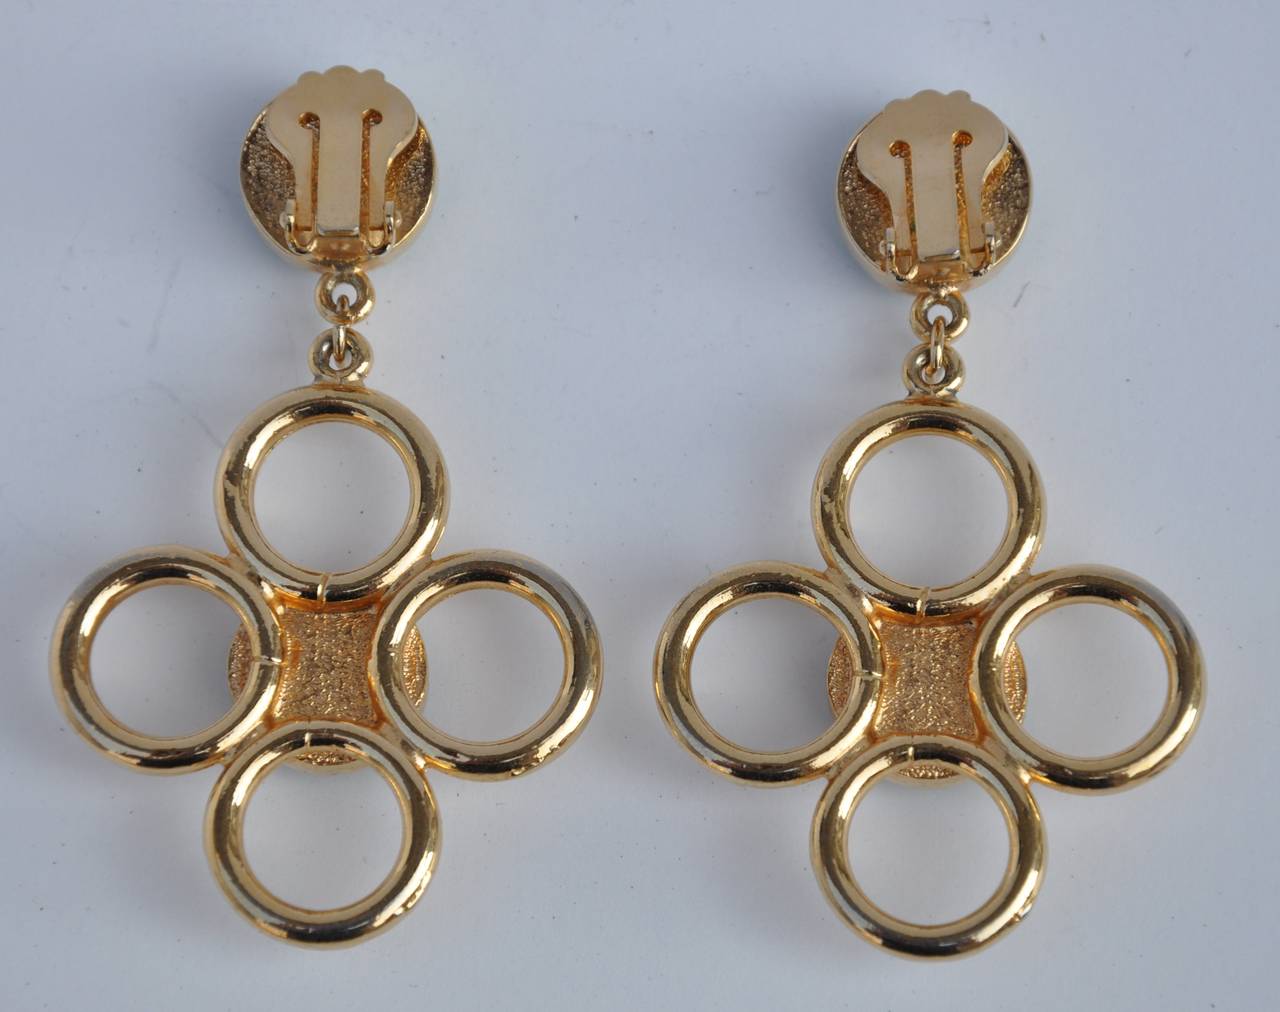 These gilded gold vermeil finish with turquoise-like earrings measures 2 5/8